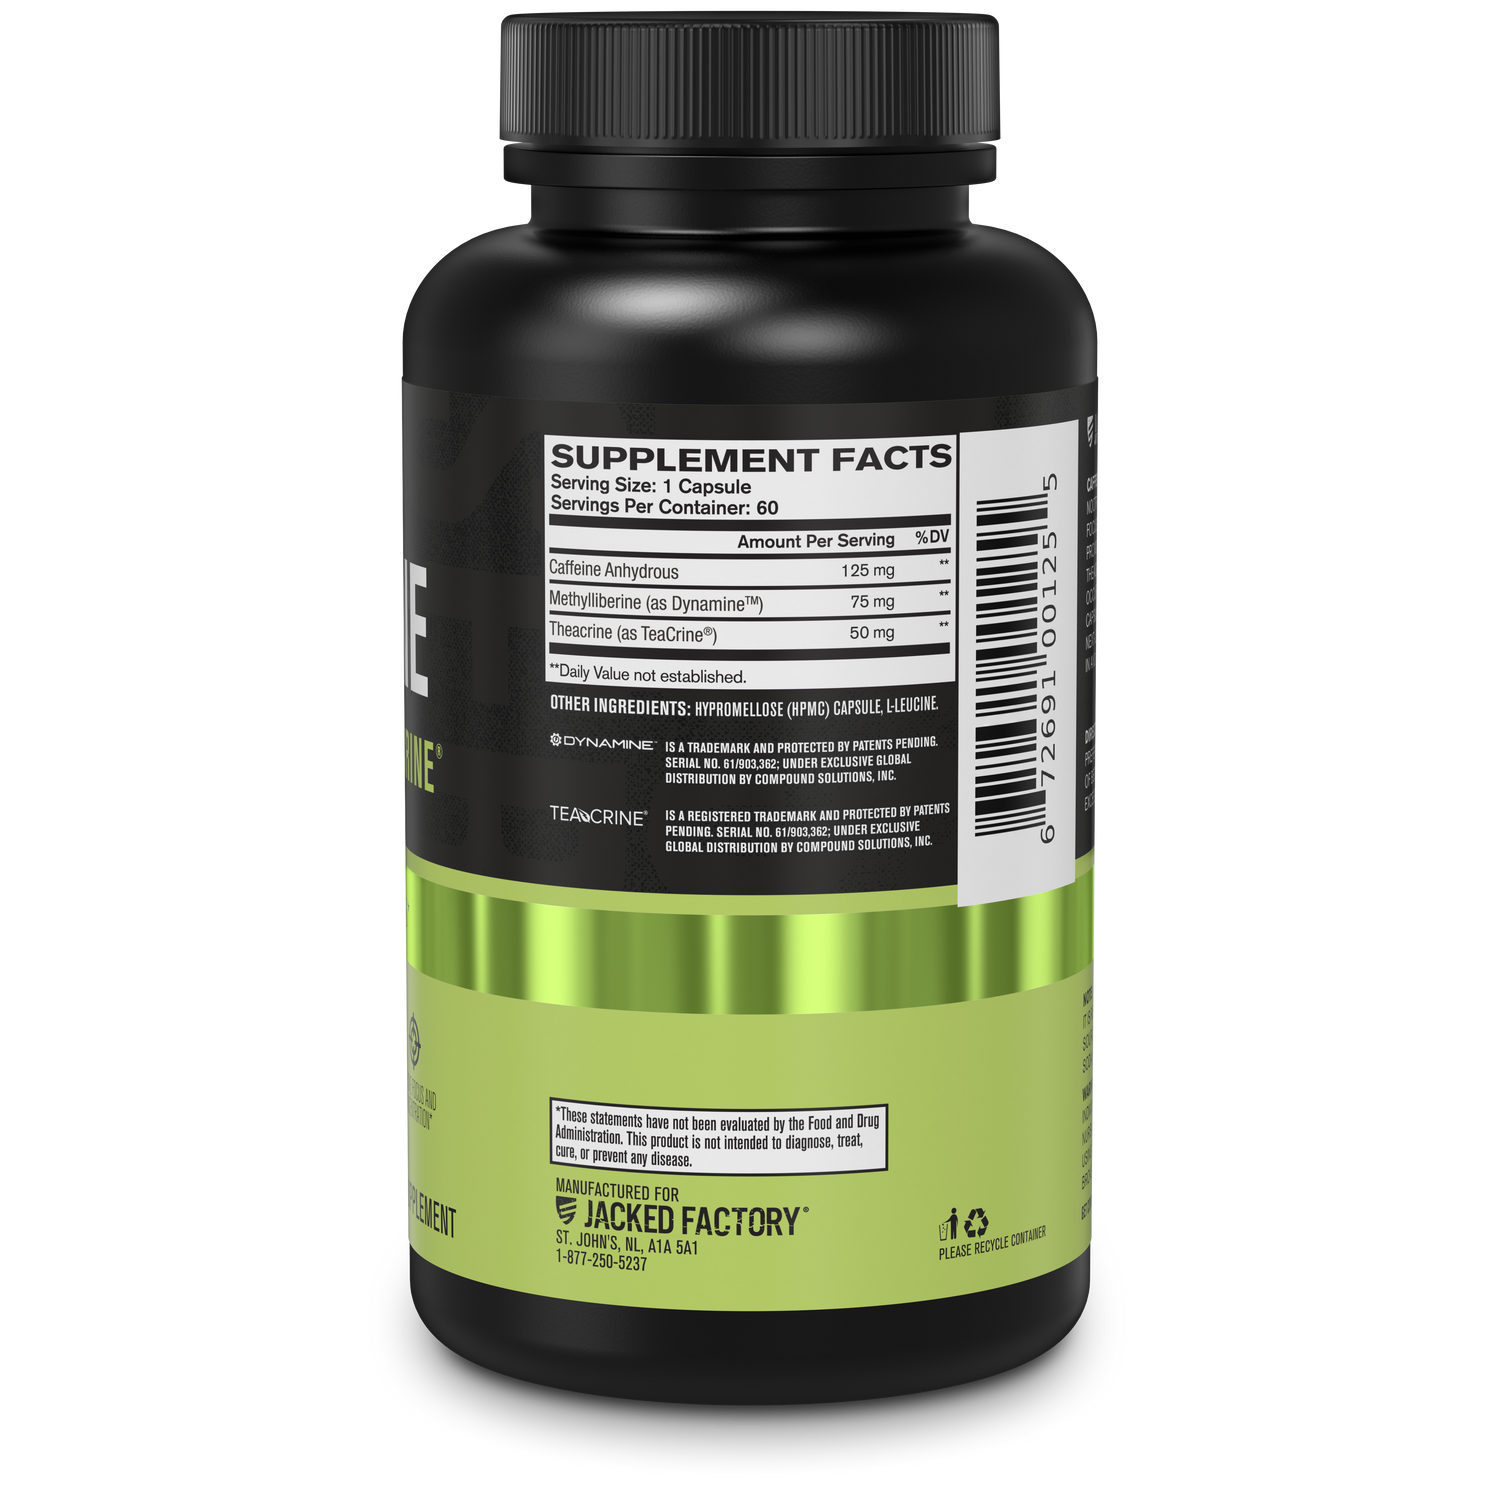 Side of Jacked Factory's Caffeine w/ Dynamine + Teacrine (60ct) in a black bottle with black and green label showing supplement facts